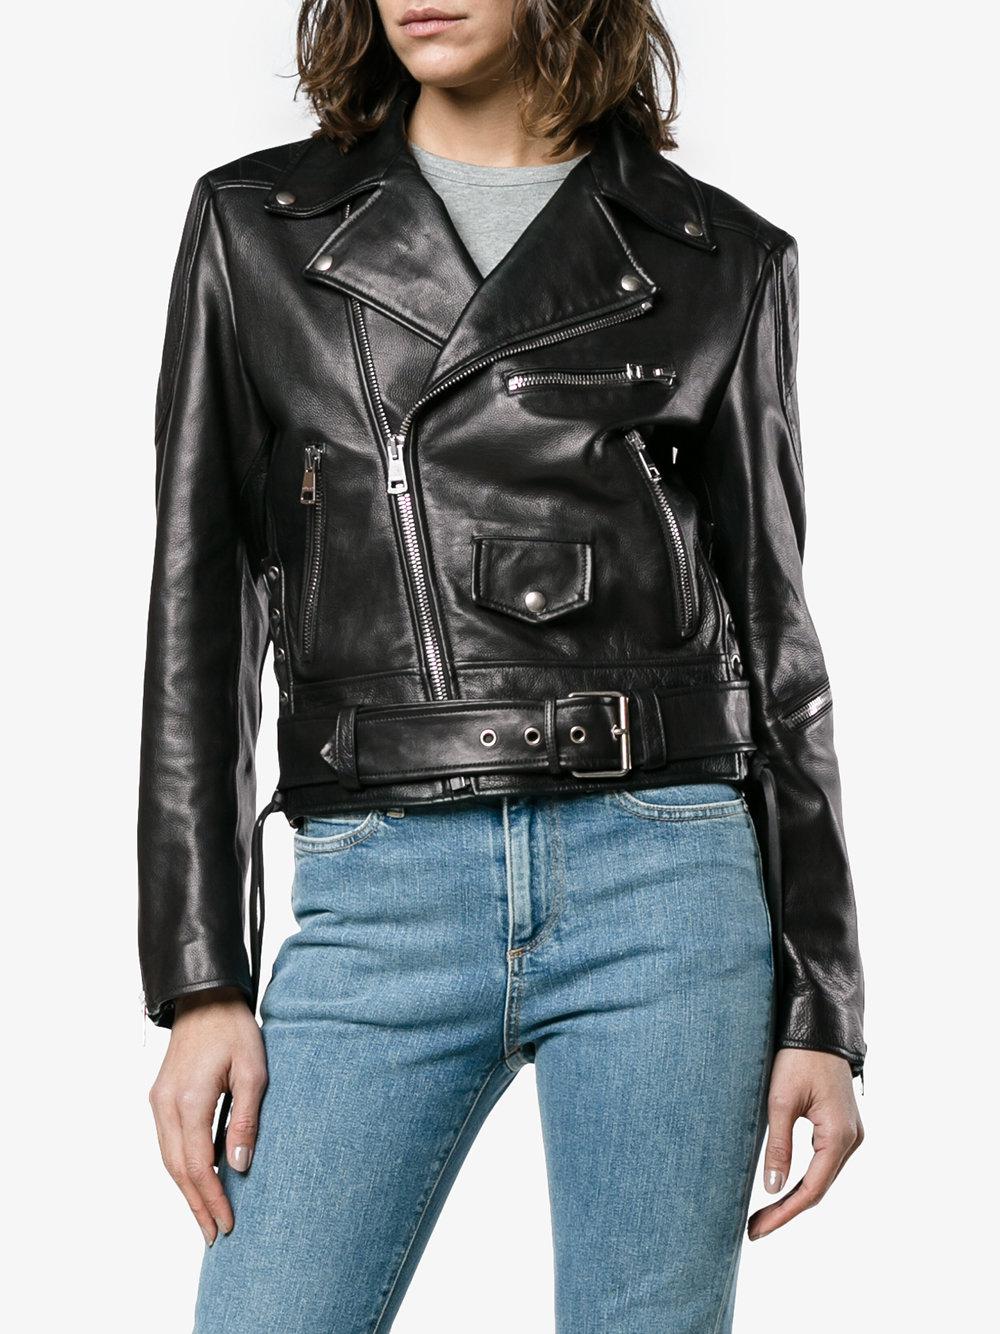 Gucci Fy Leather Jacket in Black - Lyst